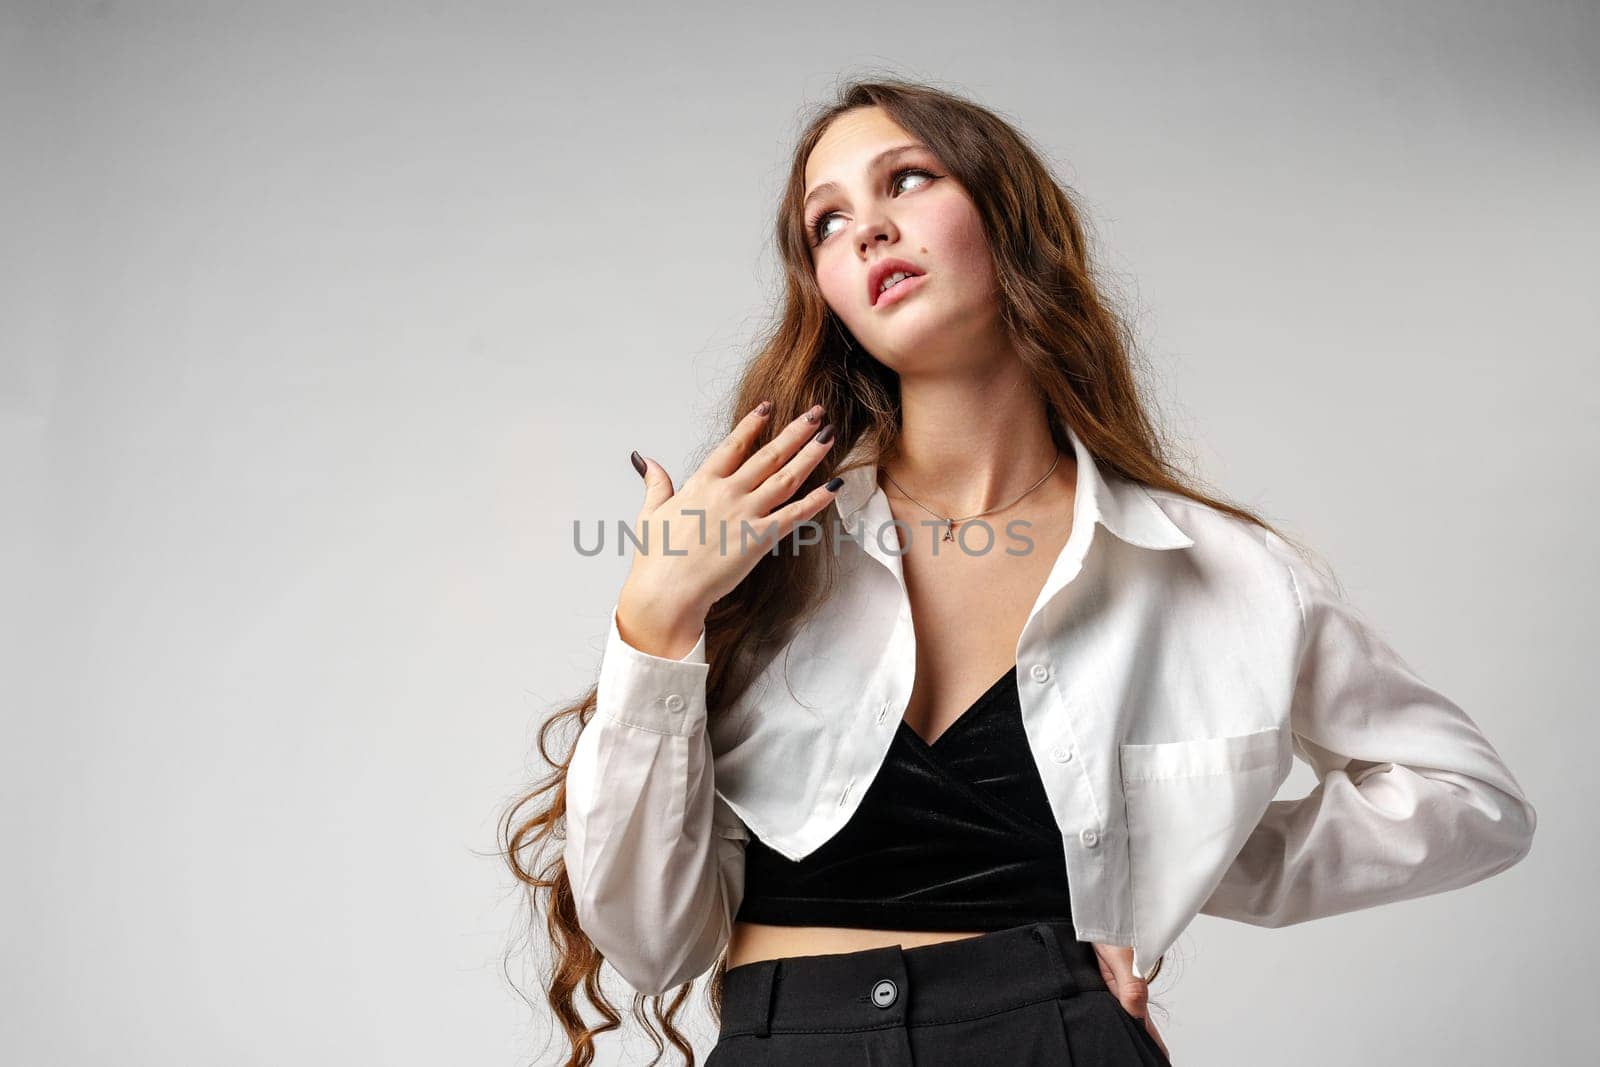 A woman with long, wavy hair stands confidently against a neutral backdrop, her head tilted upward in a pose of contemplation or aspiration. She is wearing a fashionable white oversized shirt with the collars slightly raised, layering over a sleek black top which contrasts with her pale skin. Her hand lightly touches her collarbone, adding an elegant touch to her overall poised demeanor.